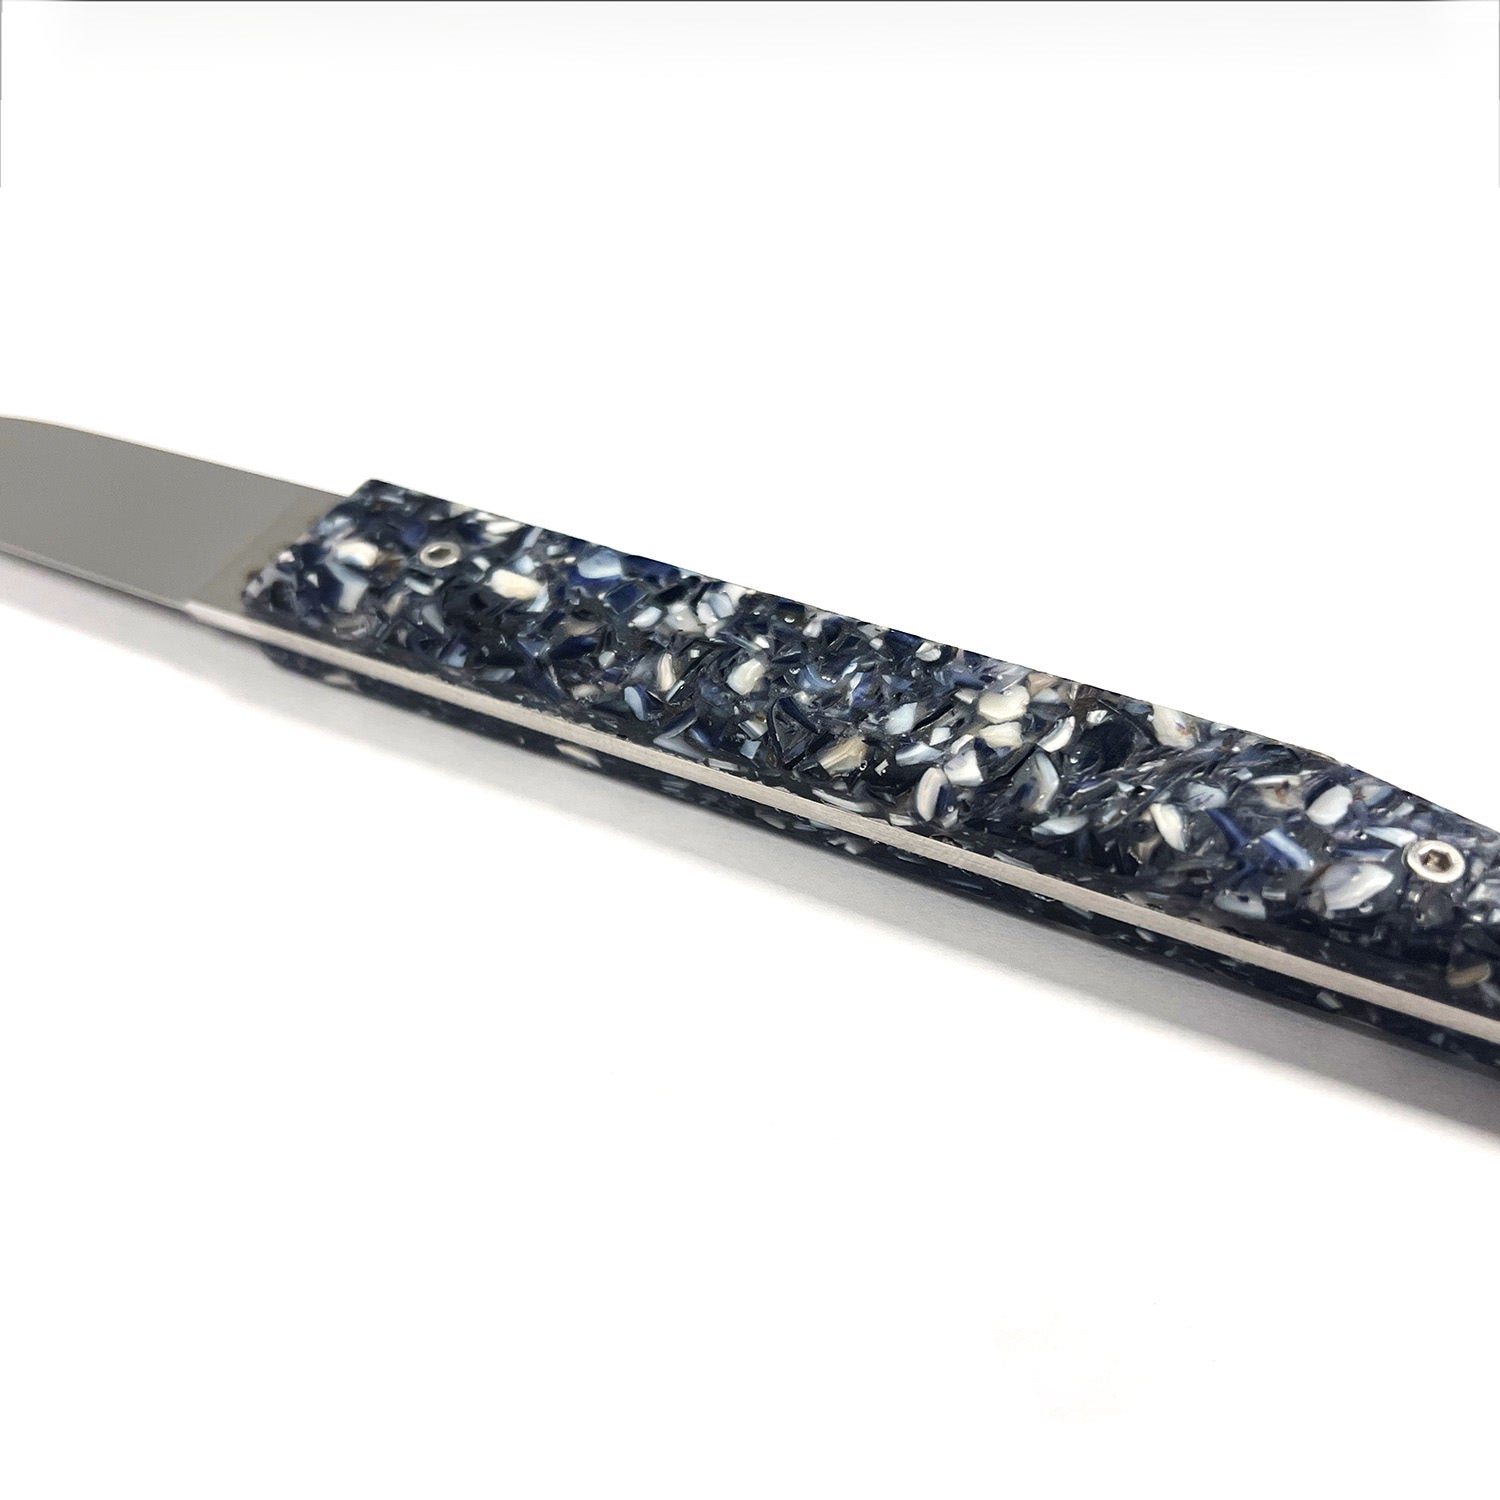 Oyster knife with a handle made from recycled mussel shells